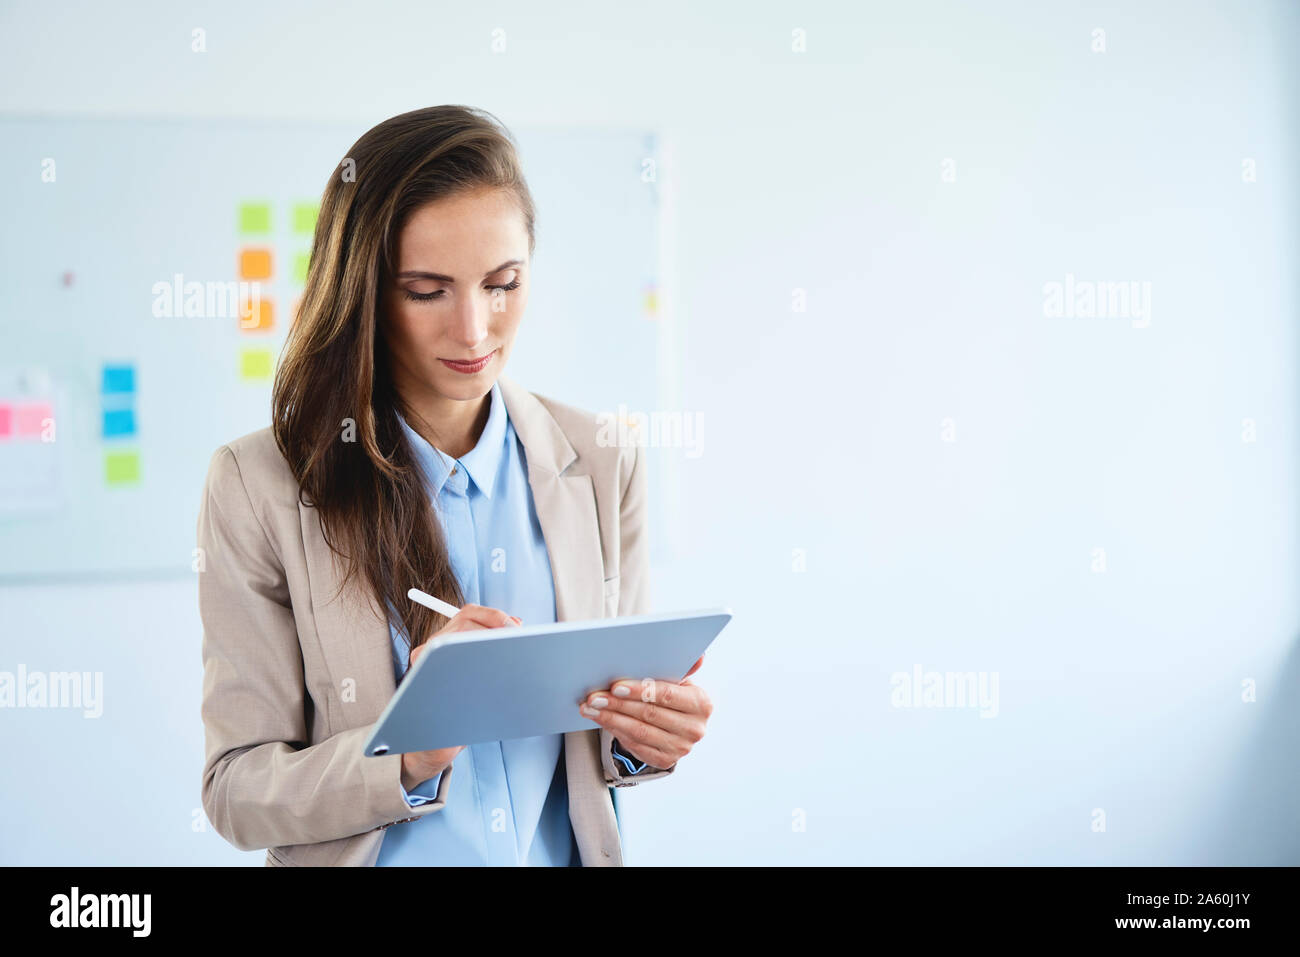 Young businesswoman writing on tablet in office Stock Photo